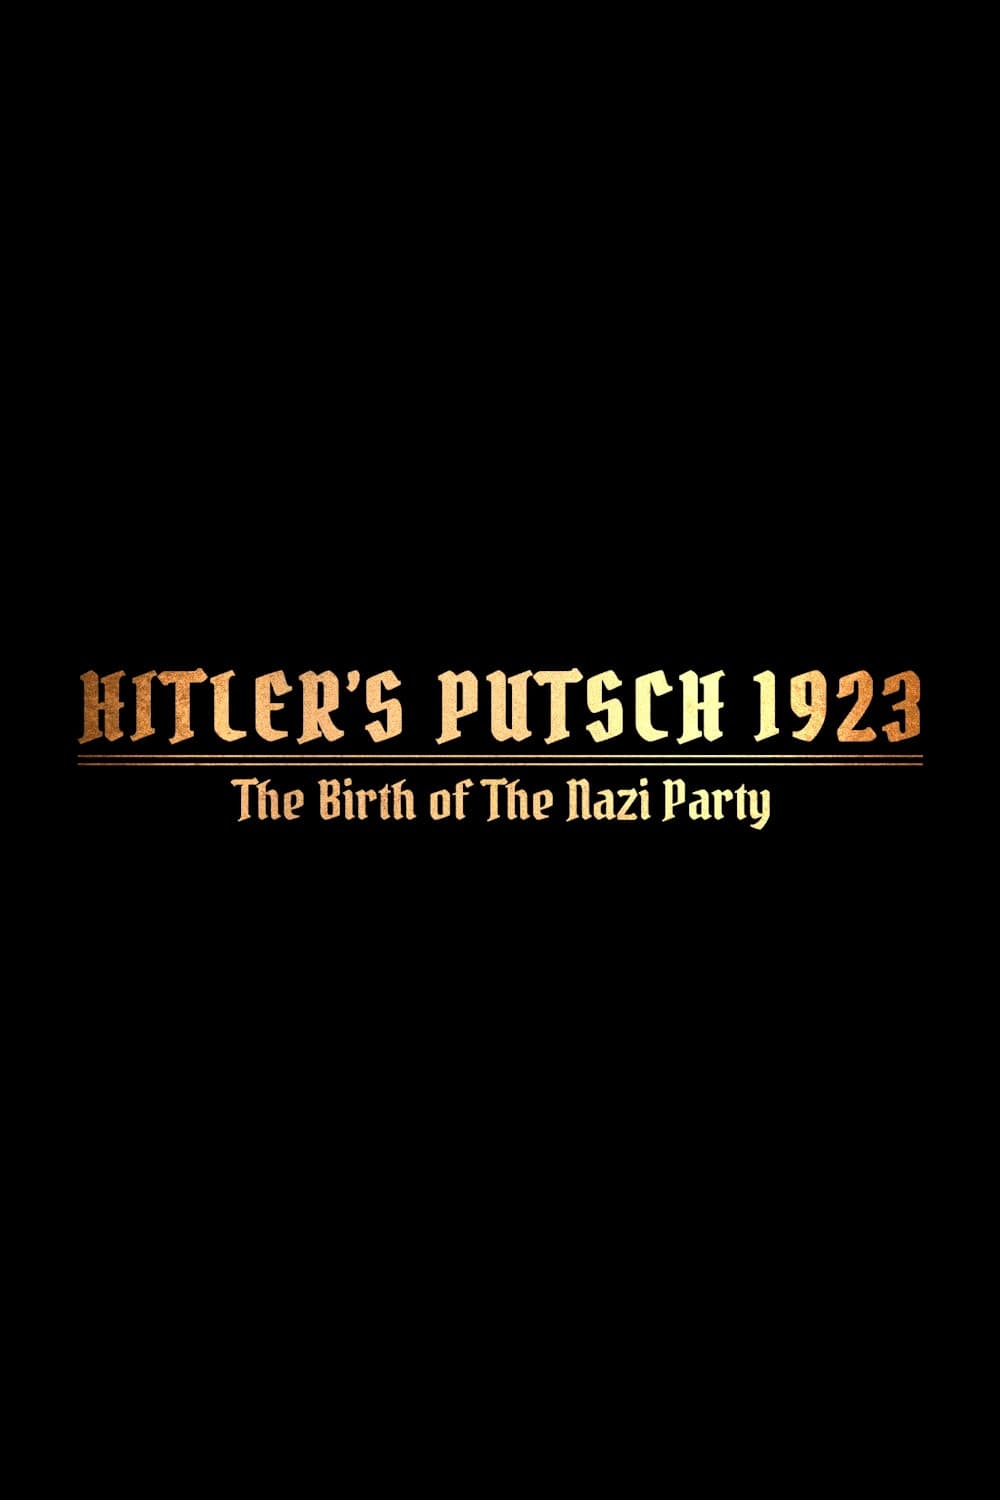 Hitler's Putsch: The Birth of the Nazi Party